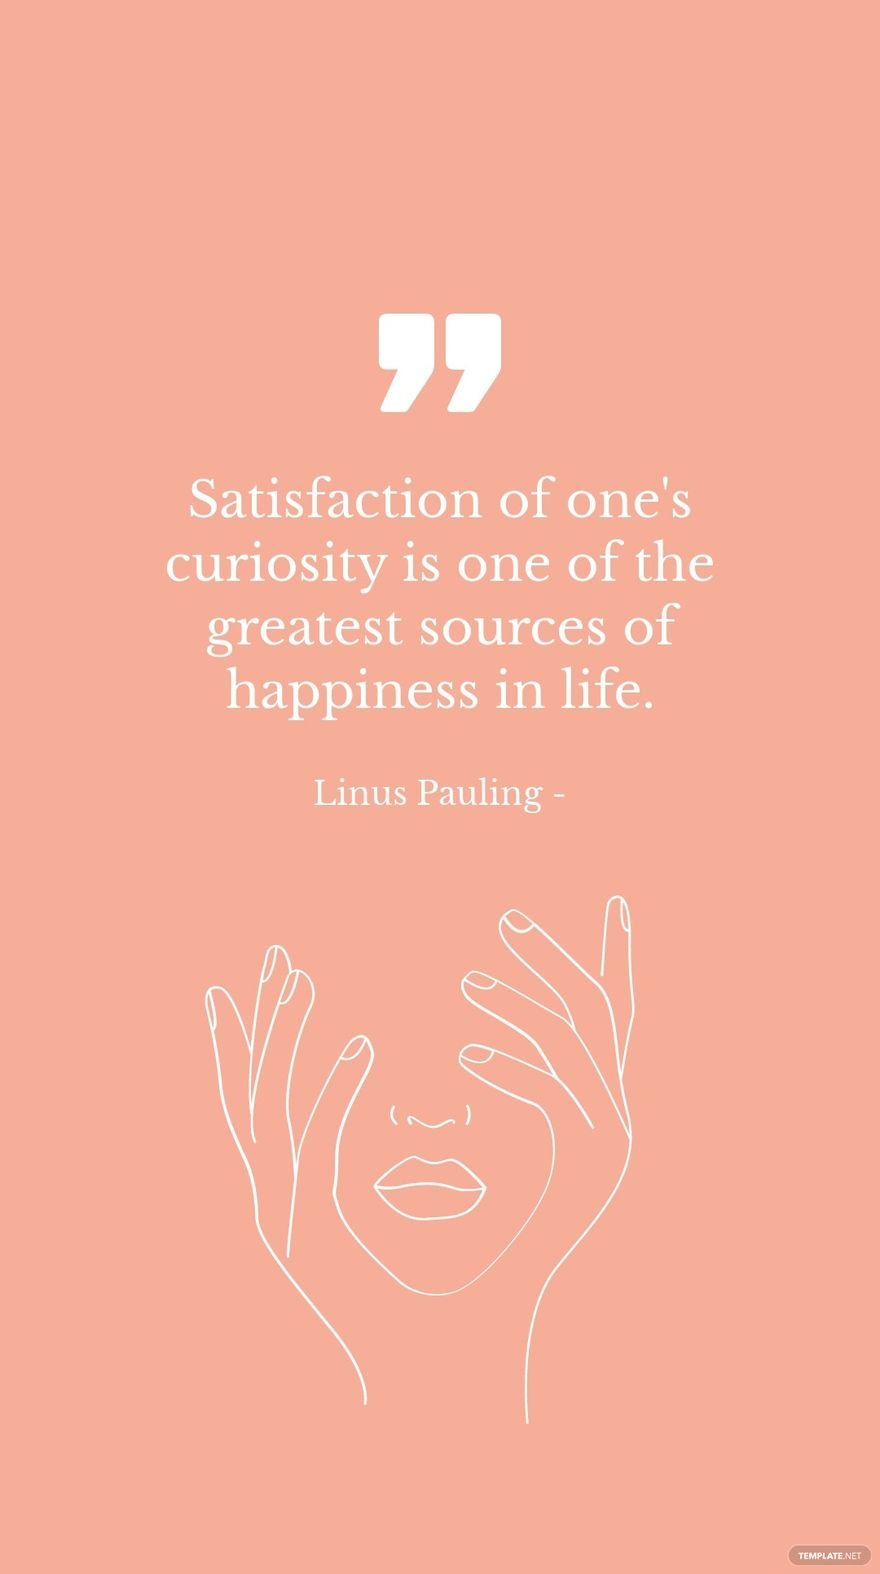 Free Linus Pauling - Satisfaction of one's curiosity is one of the greatest sources of happiness in life. in JPG